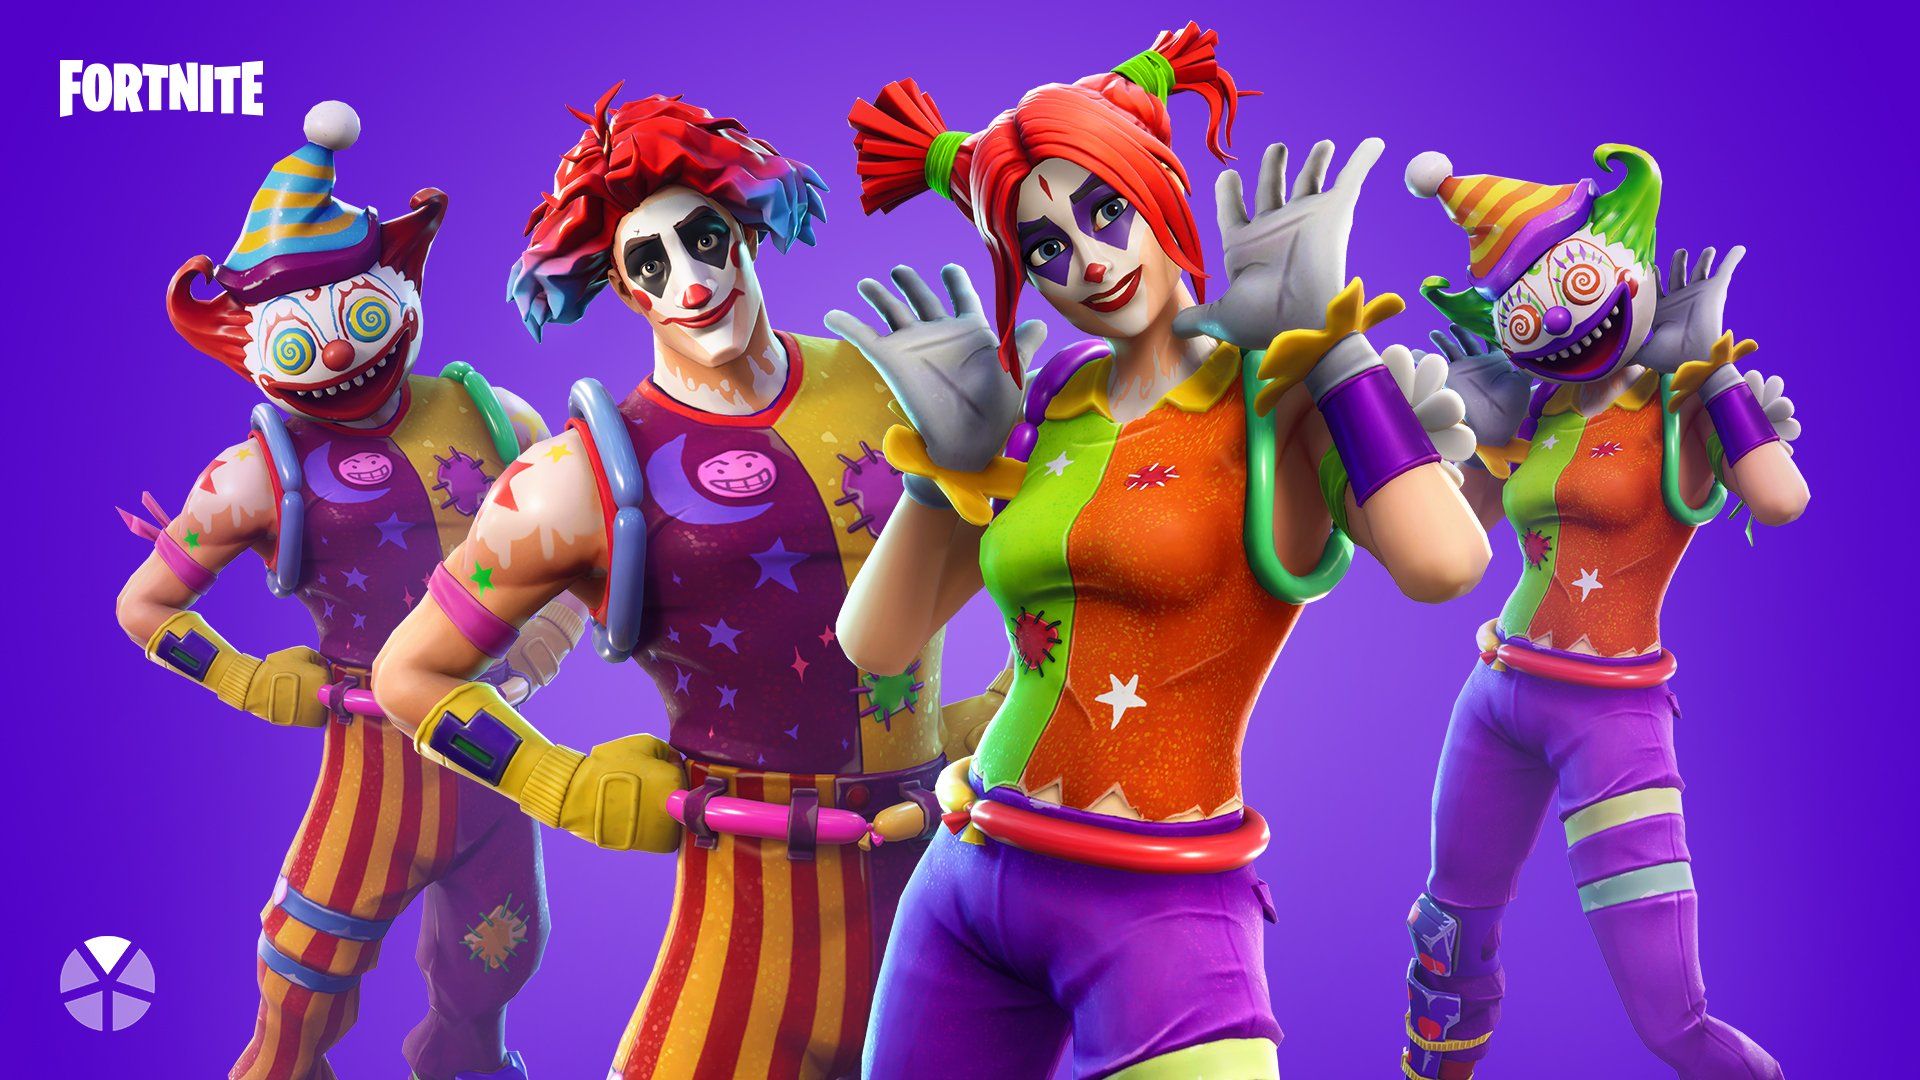 Nite Nite and Peekaboo outfits are now available in the Item Shop